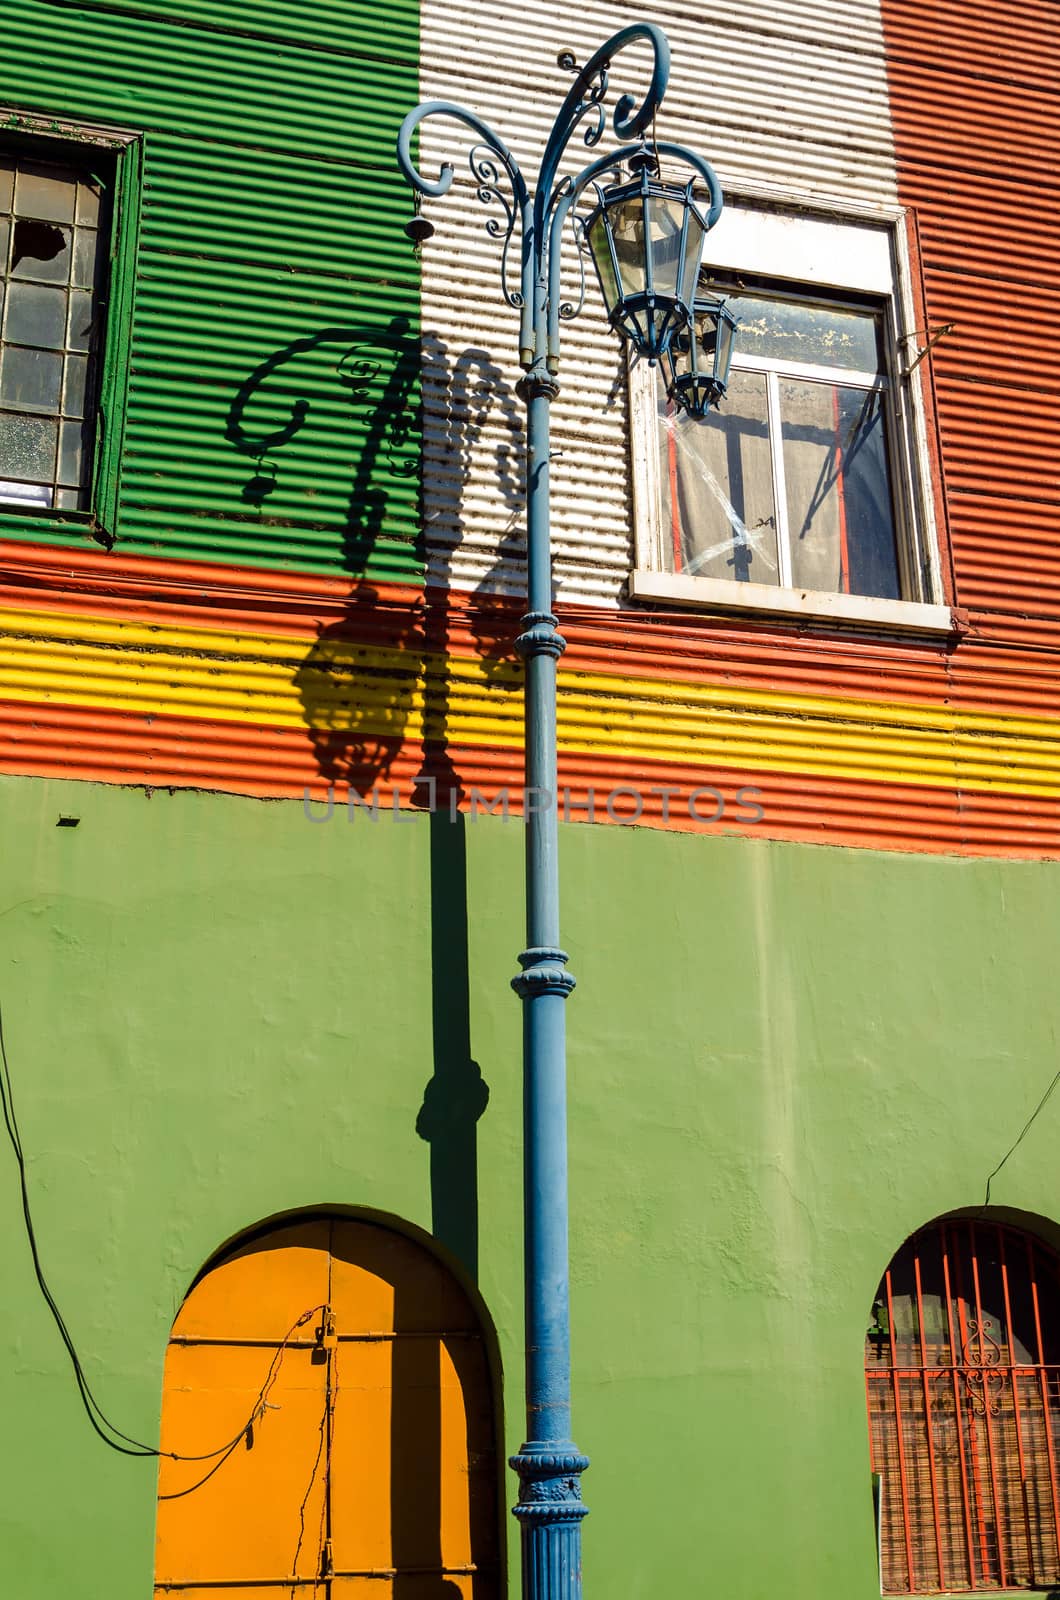 Streetlight set against a colorful wall in La Boca neighborhood of Buenos Aires, Argentina